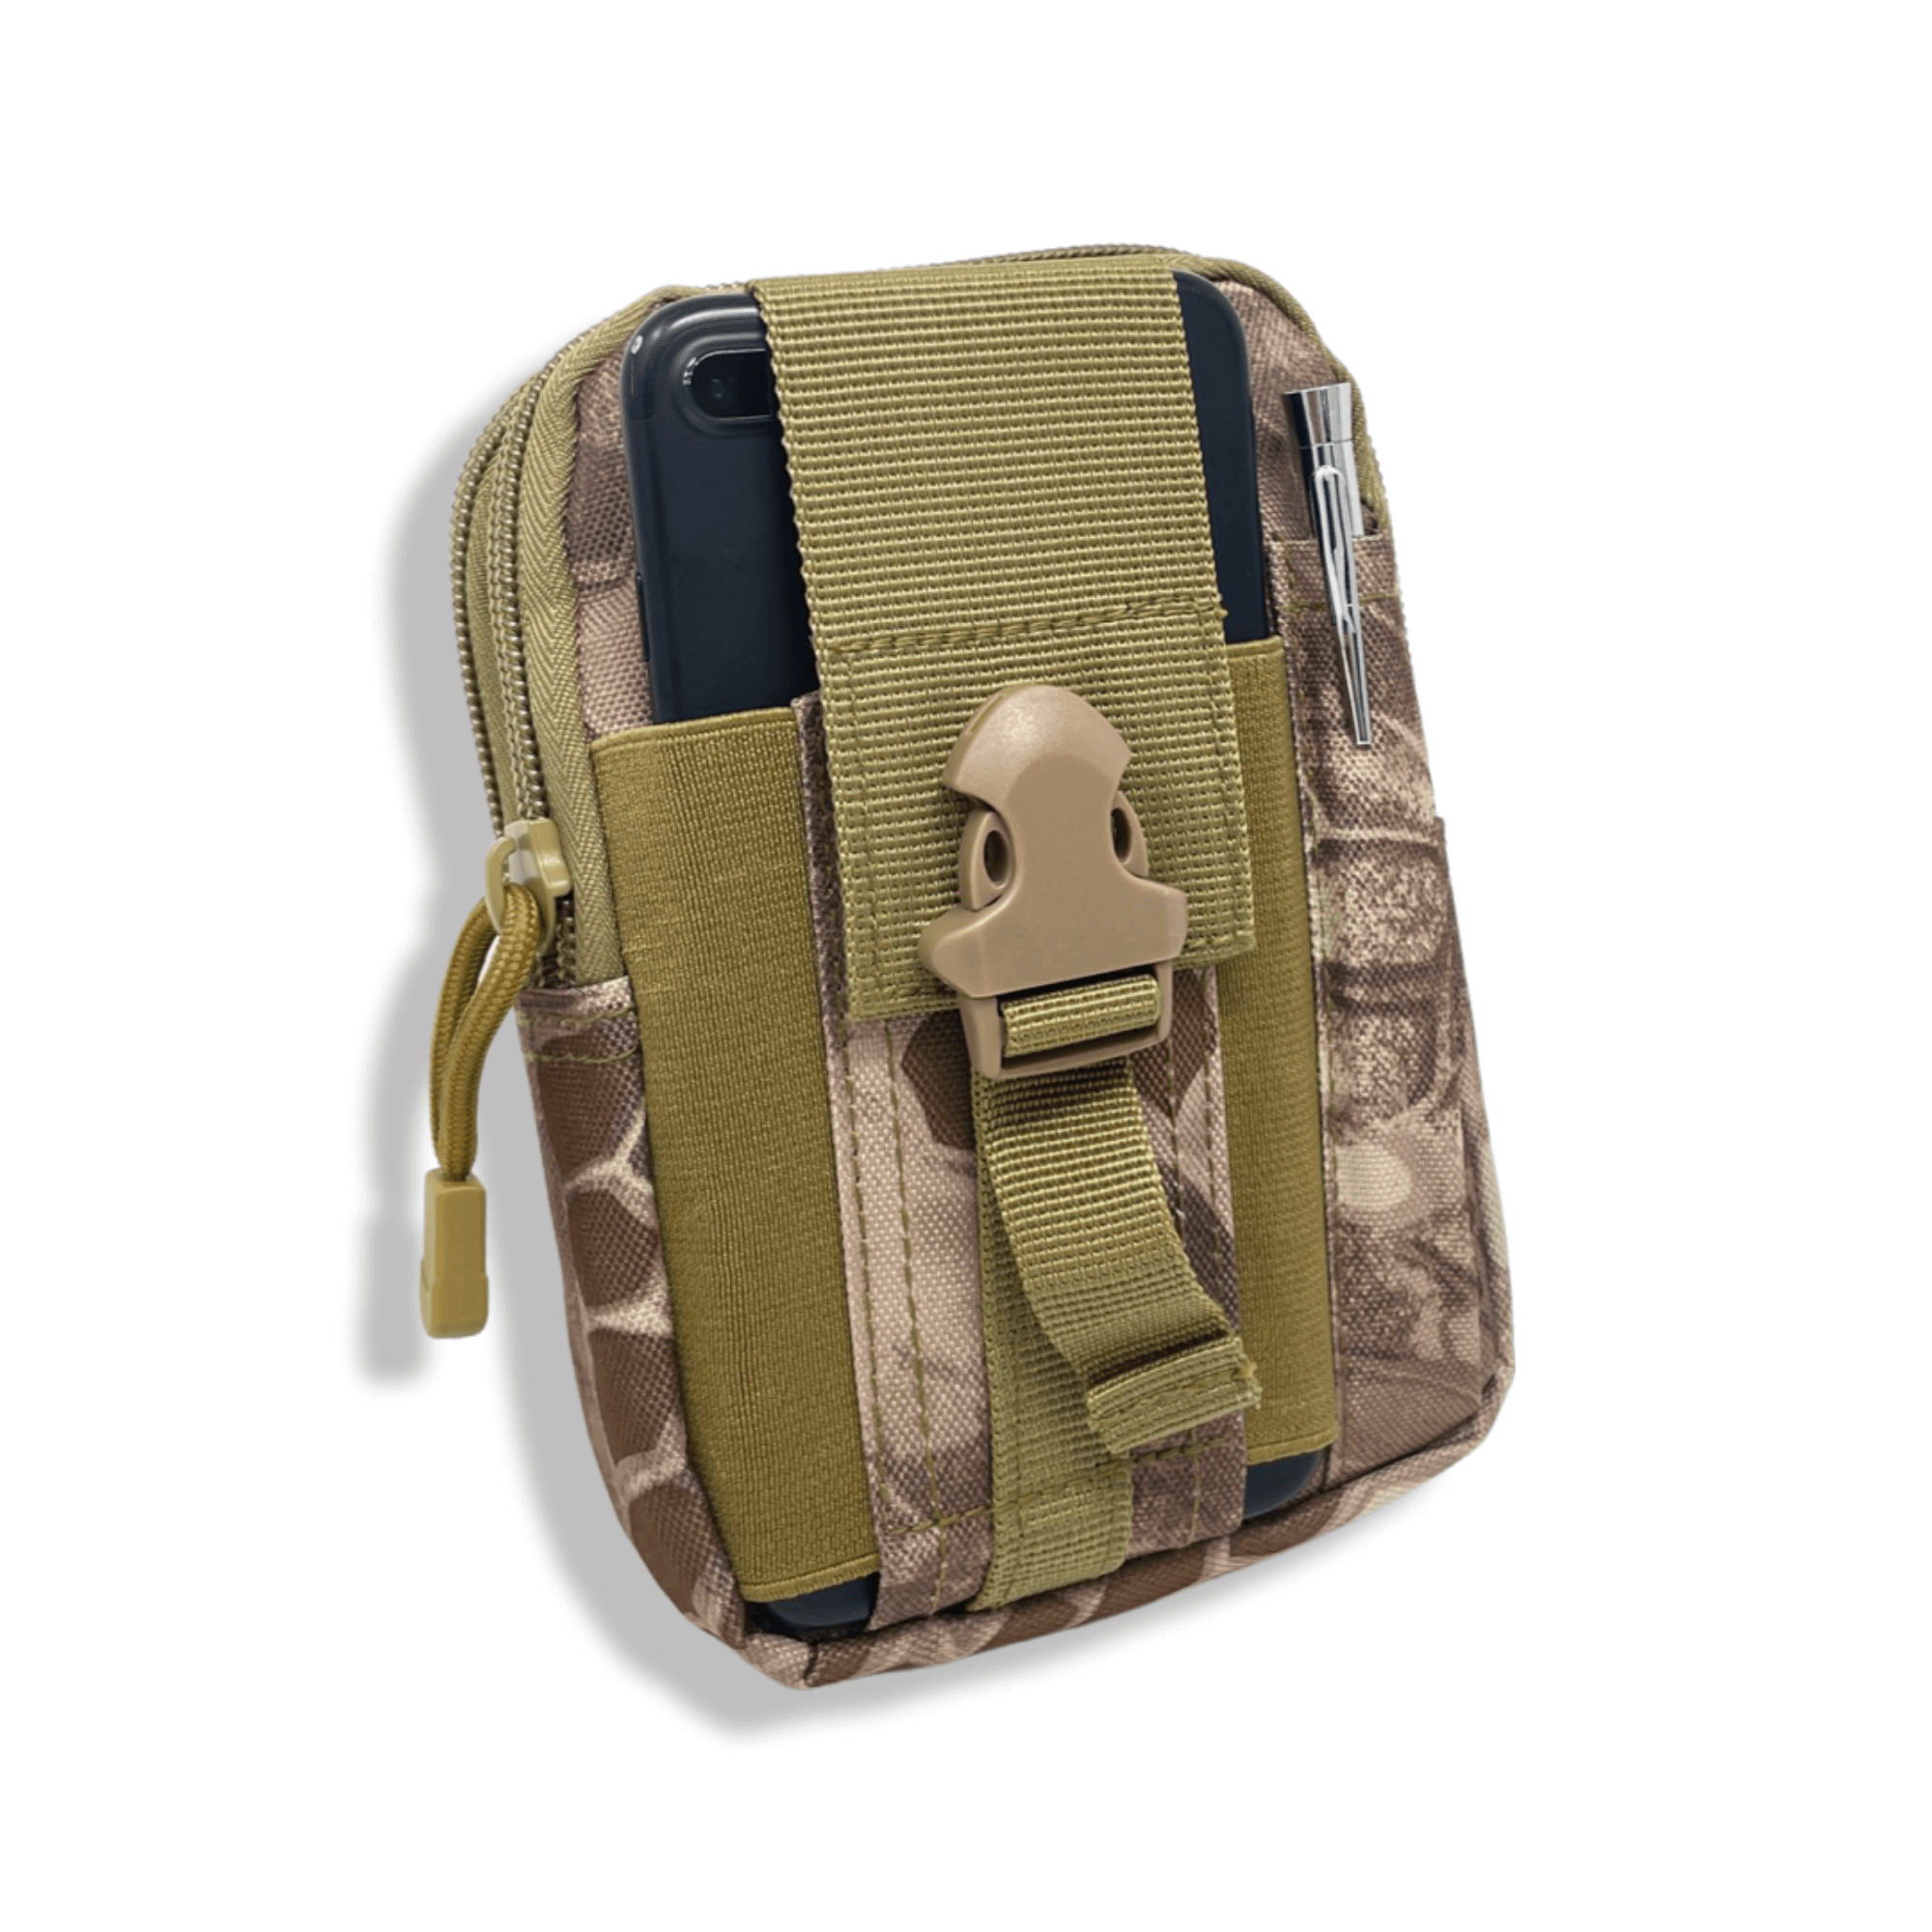 Tactical MOLLE Pouch & Waist Bag for Hiking & Outdoor Activities-32